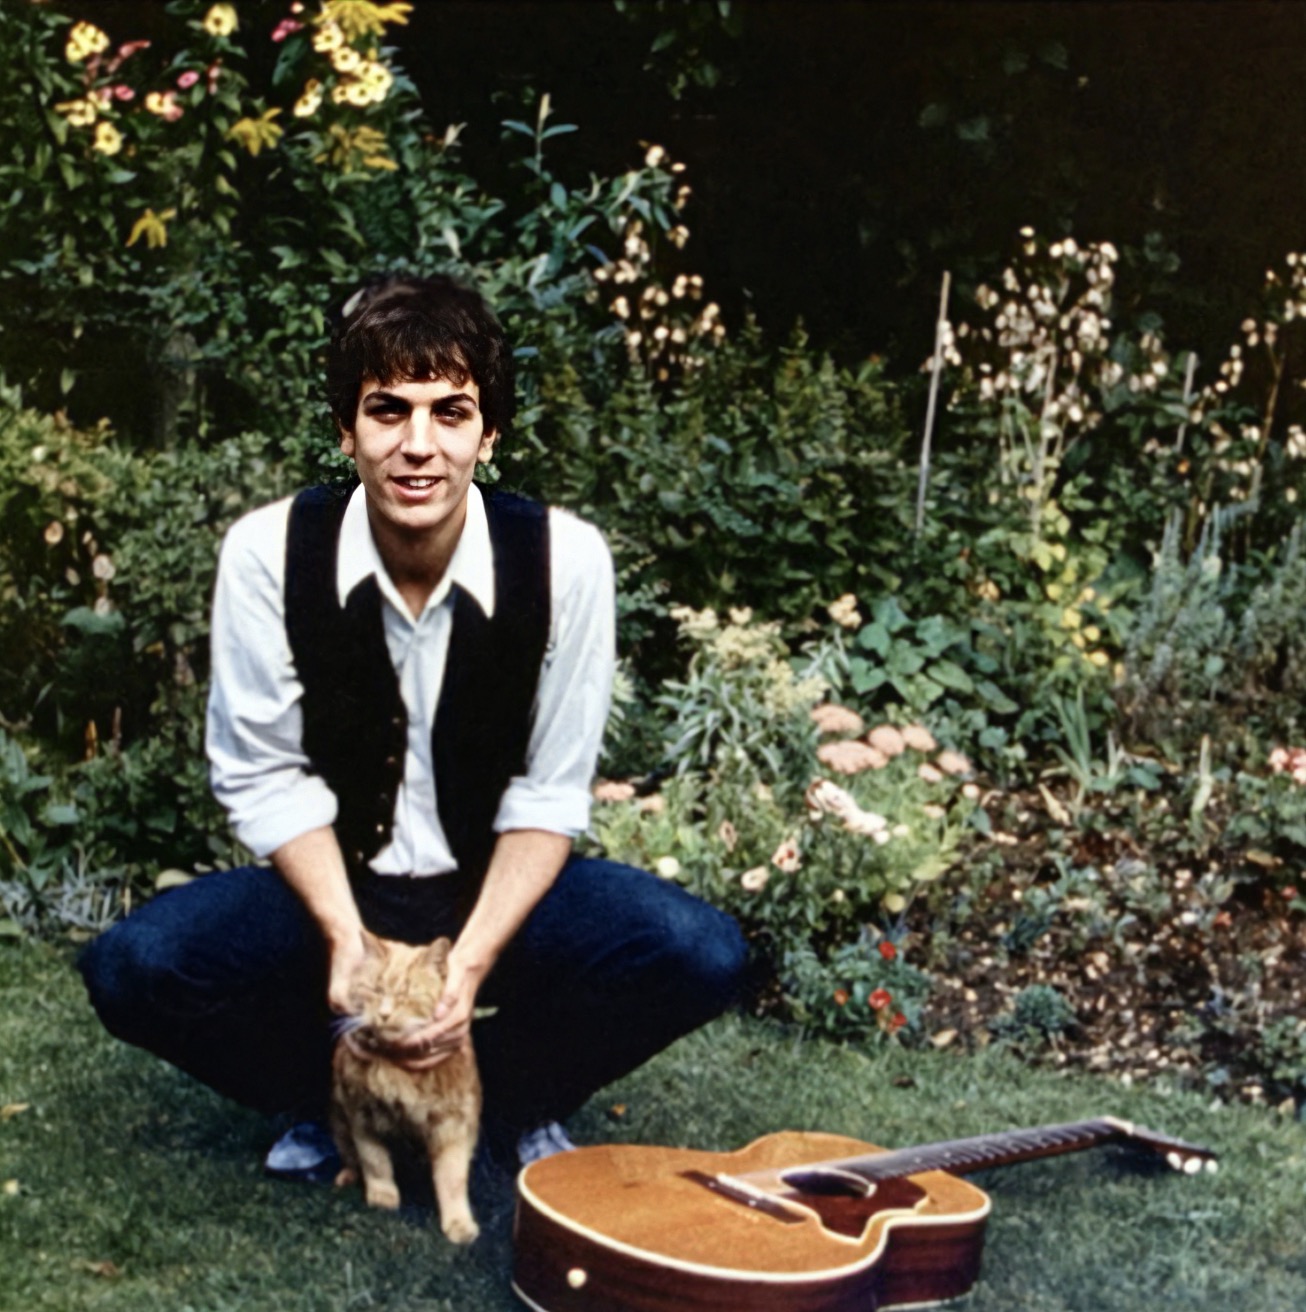 Syd Barrett in the garden with his cat and guitar